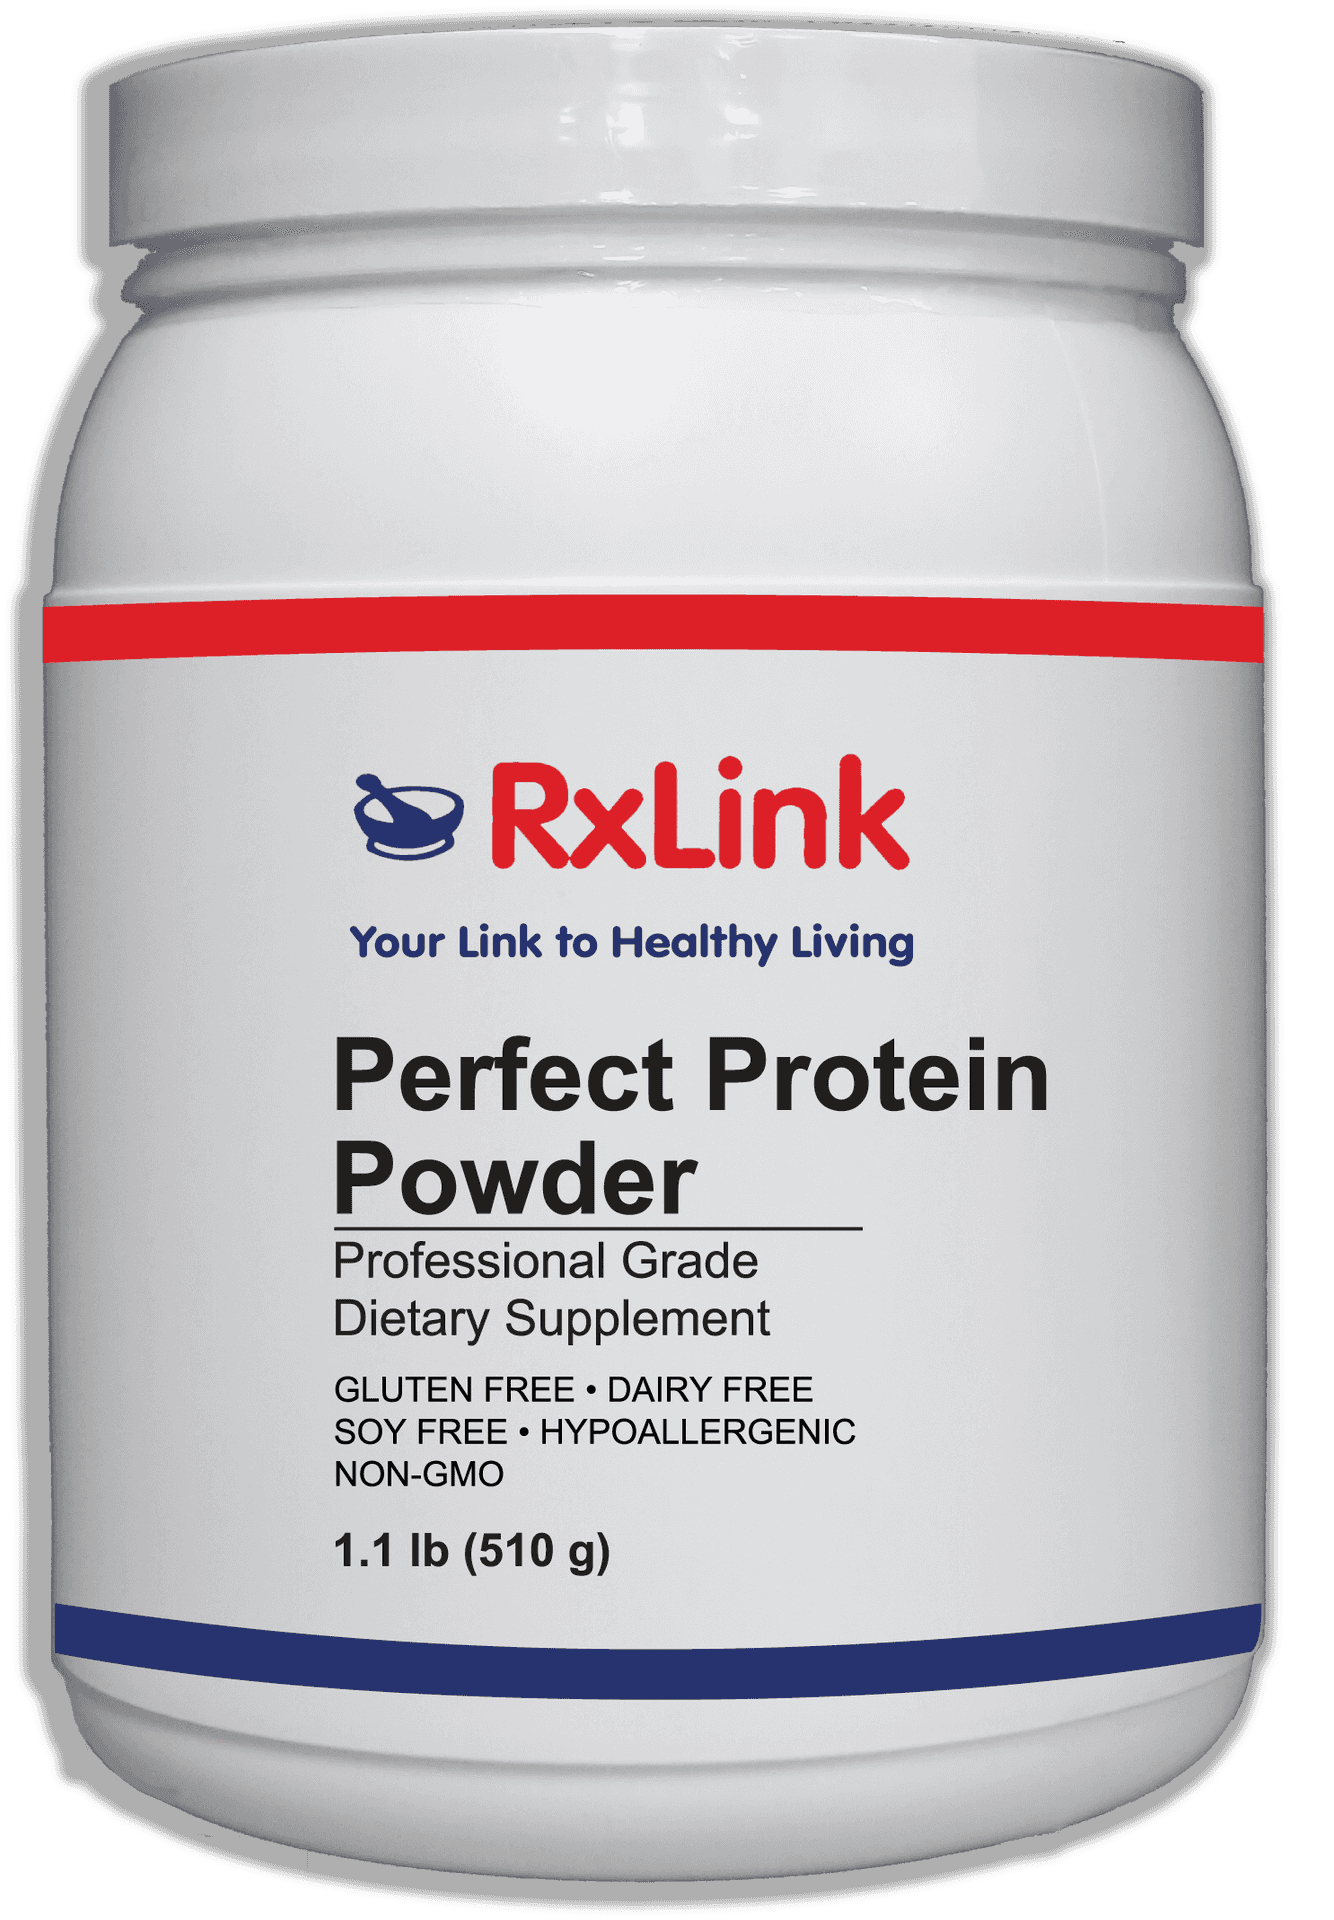 Rx Link Perfect Protein Powder Container PNG image